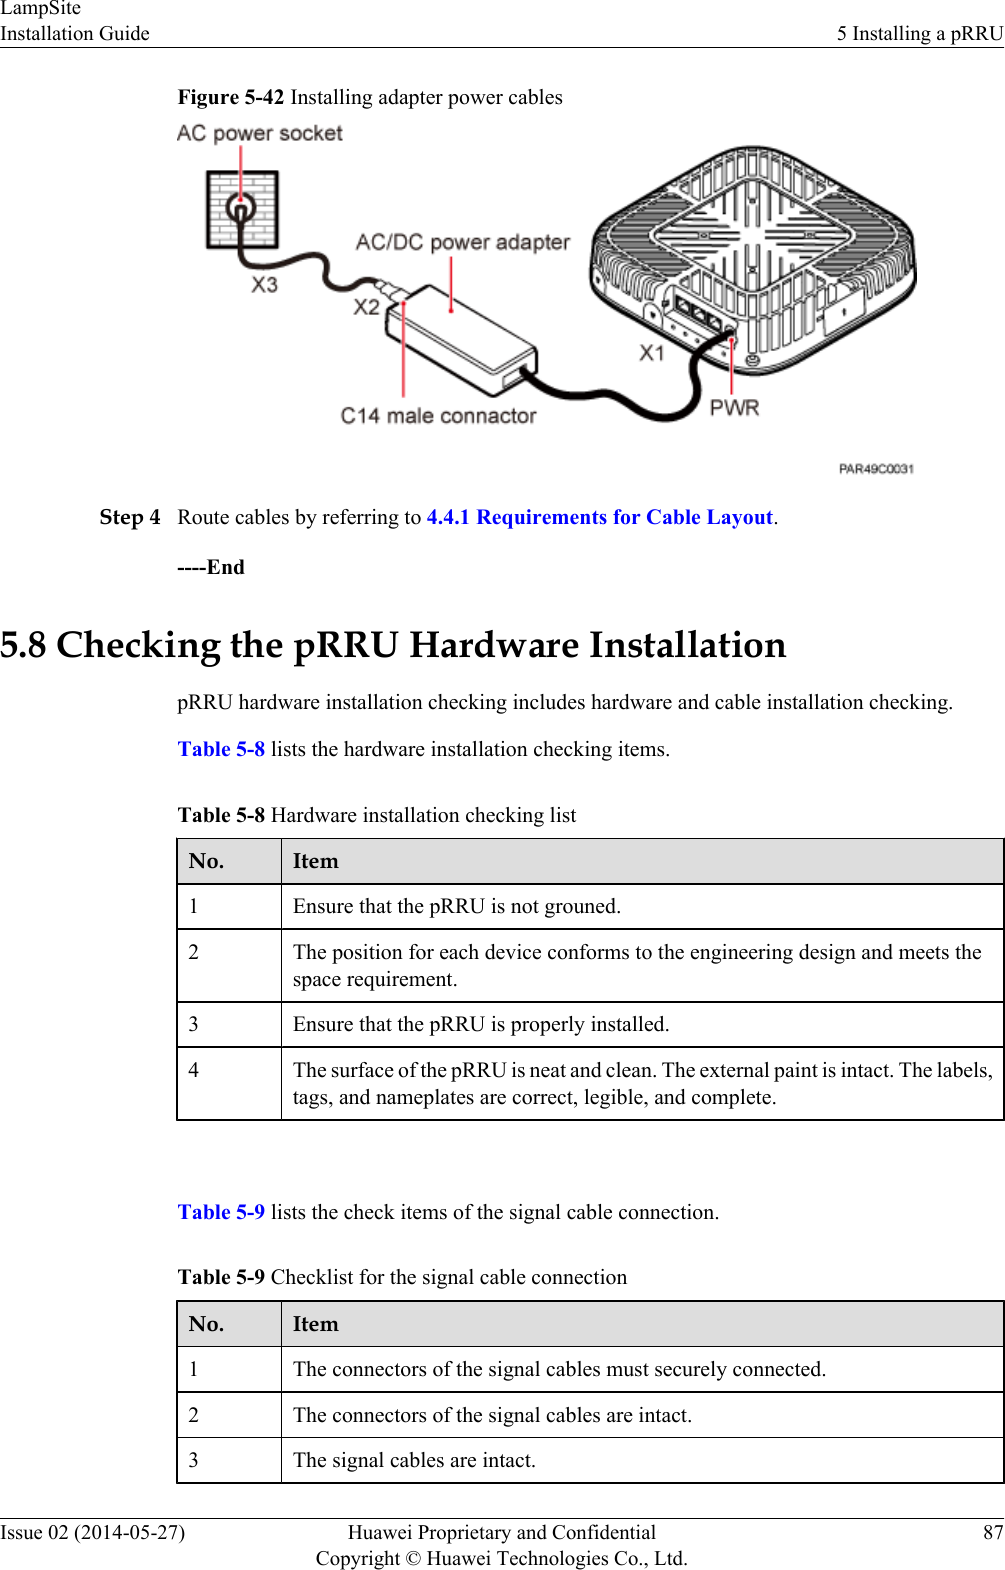 Figure 5-42 Installing adapter power cablesStep 4 Route cables by referring to 4.4.1 Requirements for Cable Layout.----End5.8 Checking the pRRU Hardware InstallationpRRU hardware installation checking includes hardware and cable installation checking.Table 5-8 lists the hardware installation checking items.Table 5-8 Hardware installation checking listNo. Item1Ensure that the pRRU is not grouned.2 The position for each device conforms to the engineering design and meets thespace requirement.3 Ensure that the pRRU is properly installed.4 The surface of the pRRU is neat and clean. The external paint is intact. The labels,tags, and nameplates are correct, legible, and complete. Table 5-9 lists the check items of the signal cable connection.Table 5-9 Checklist for the signal cable connectionNo. Item1The connectors of the signal cables must securely connected.2 The connectors of the signal cables are intact.3 The signal cables are intact.LampSiteInstallation Guide 5 Installing a pRRUIssue 02 (2014-05-27) Huawei Proprietary and ConfidentialCopyright © Huawei Technologies Co., Ltd.87